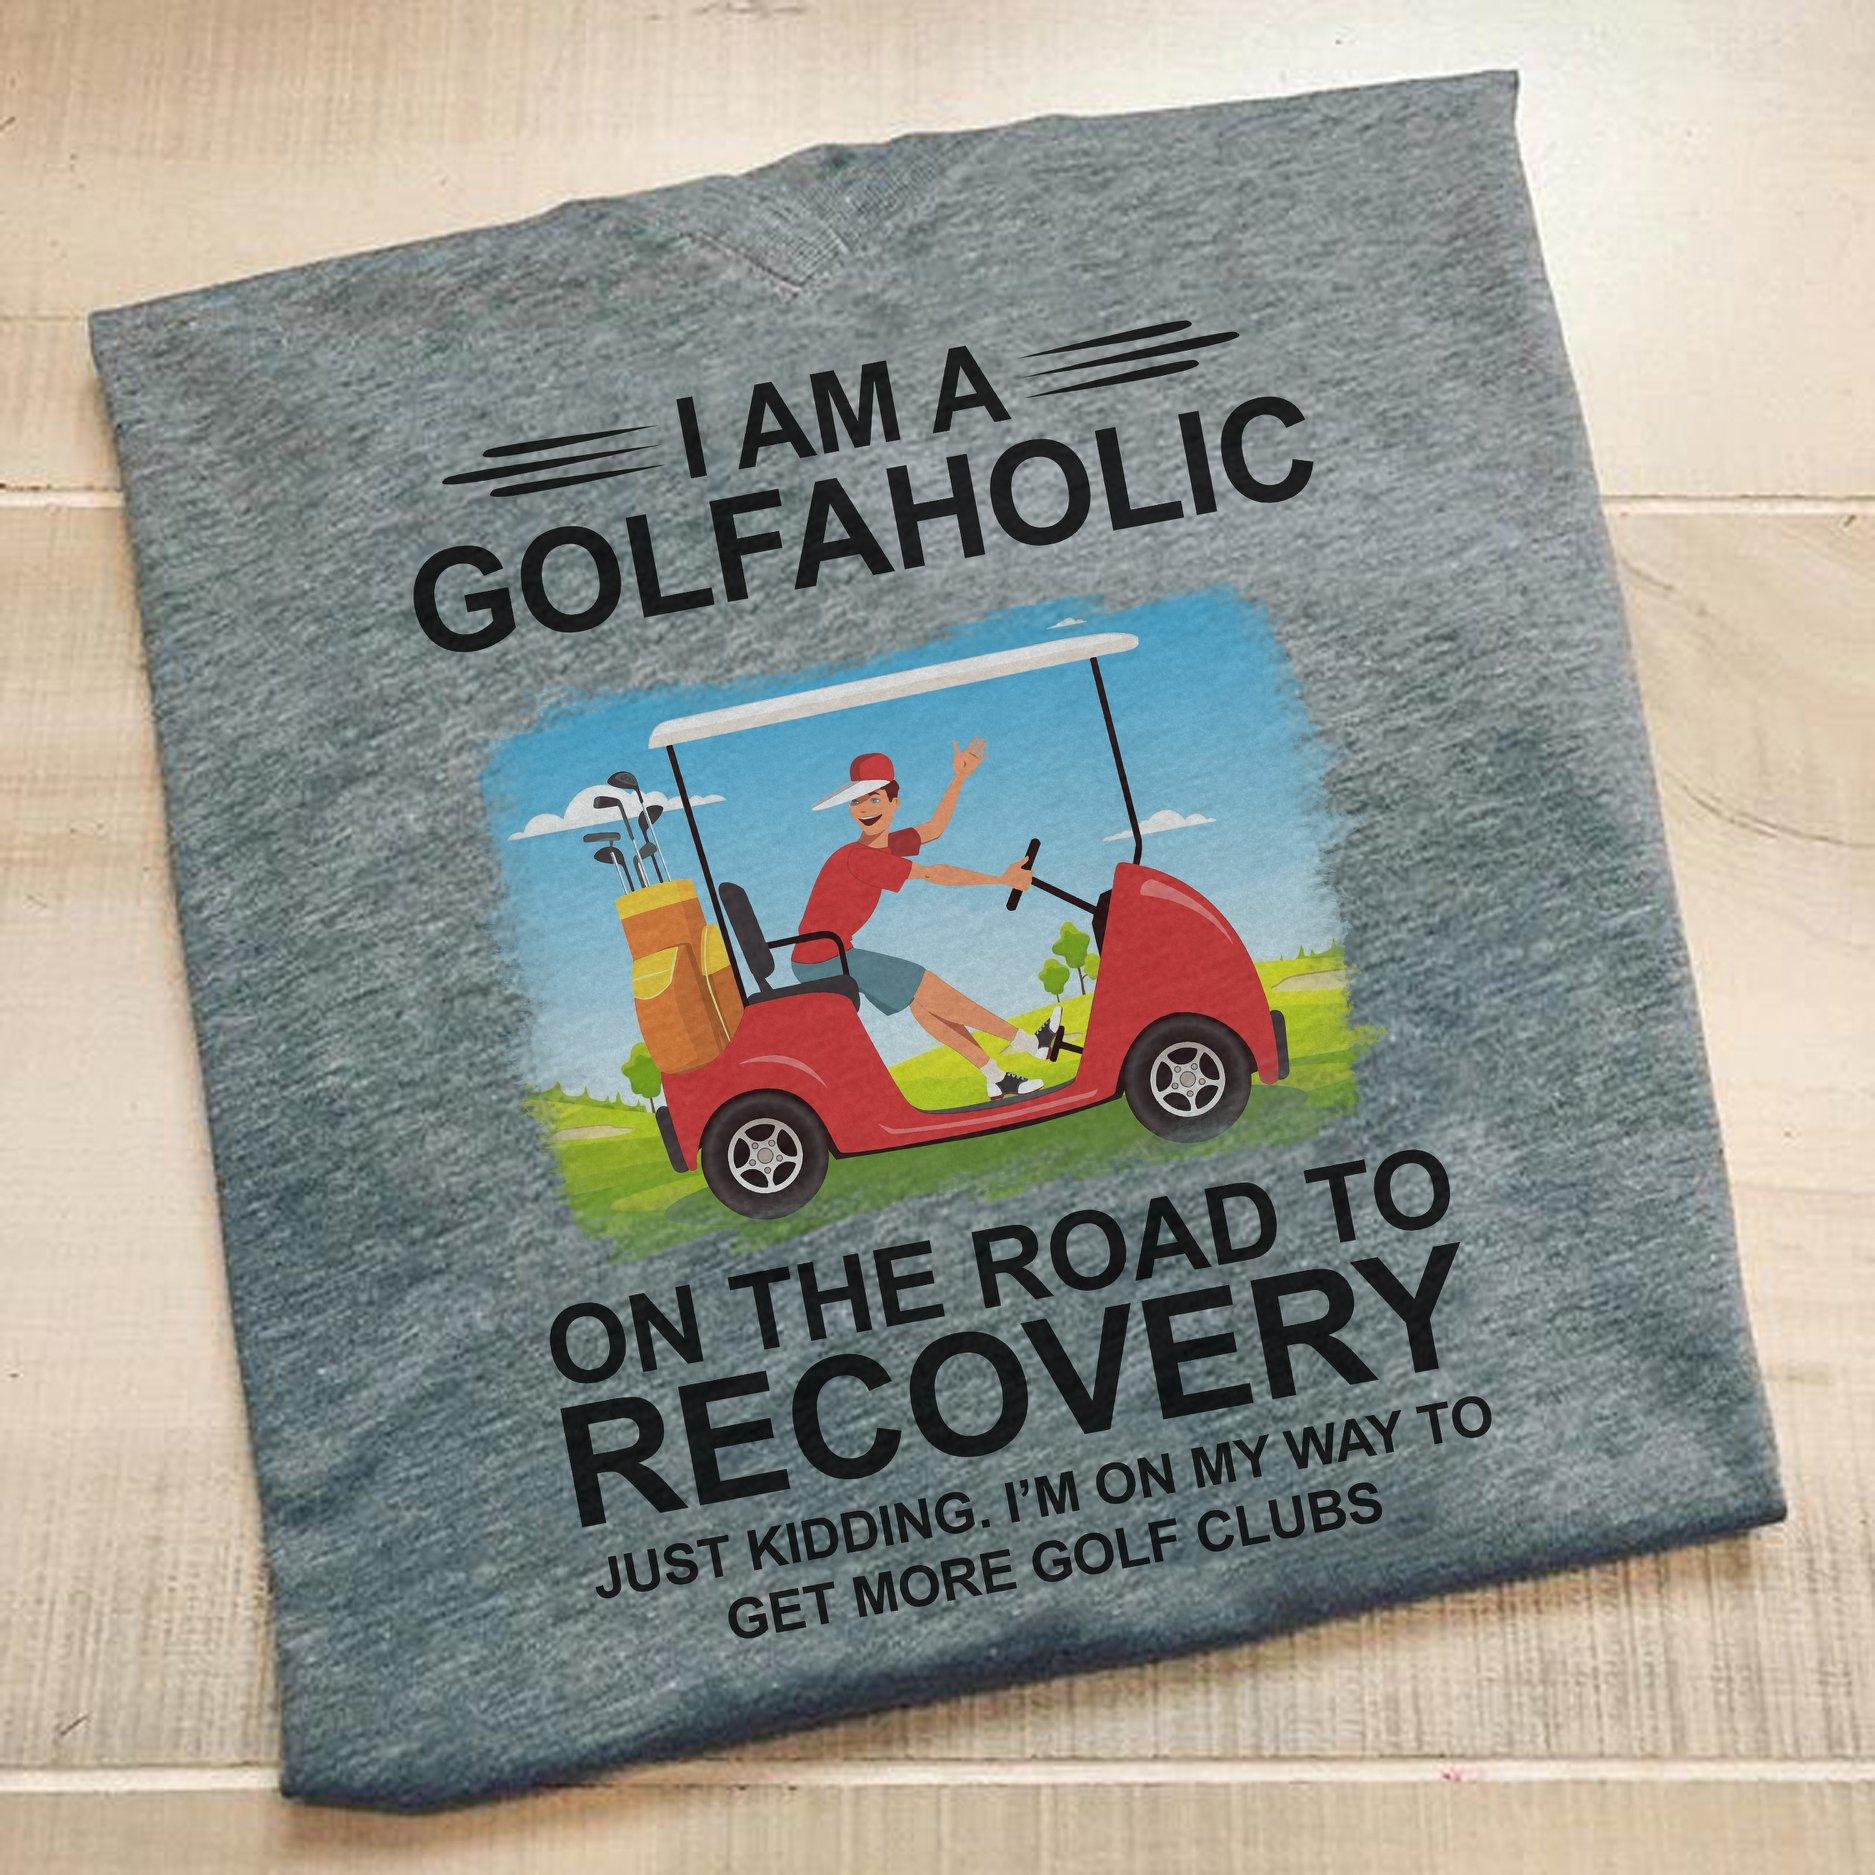 Man Driving Golf Cart, Gift for golfaholic - I am a golfaholic on the road to recovery just kidding i'm on my way to get more golf clubs